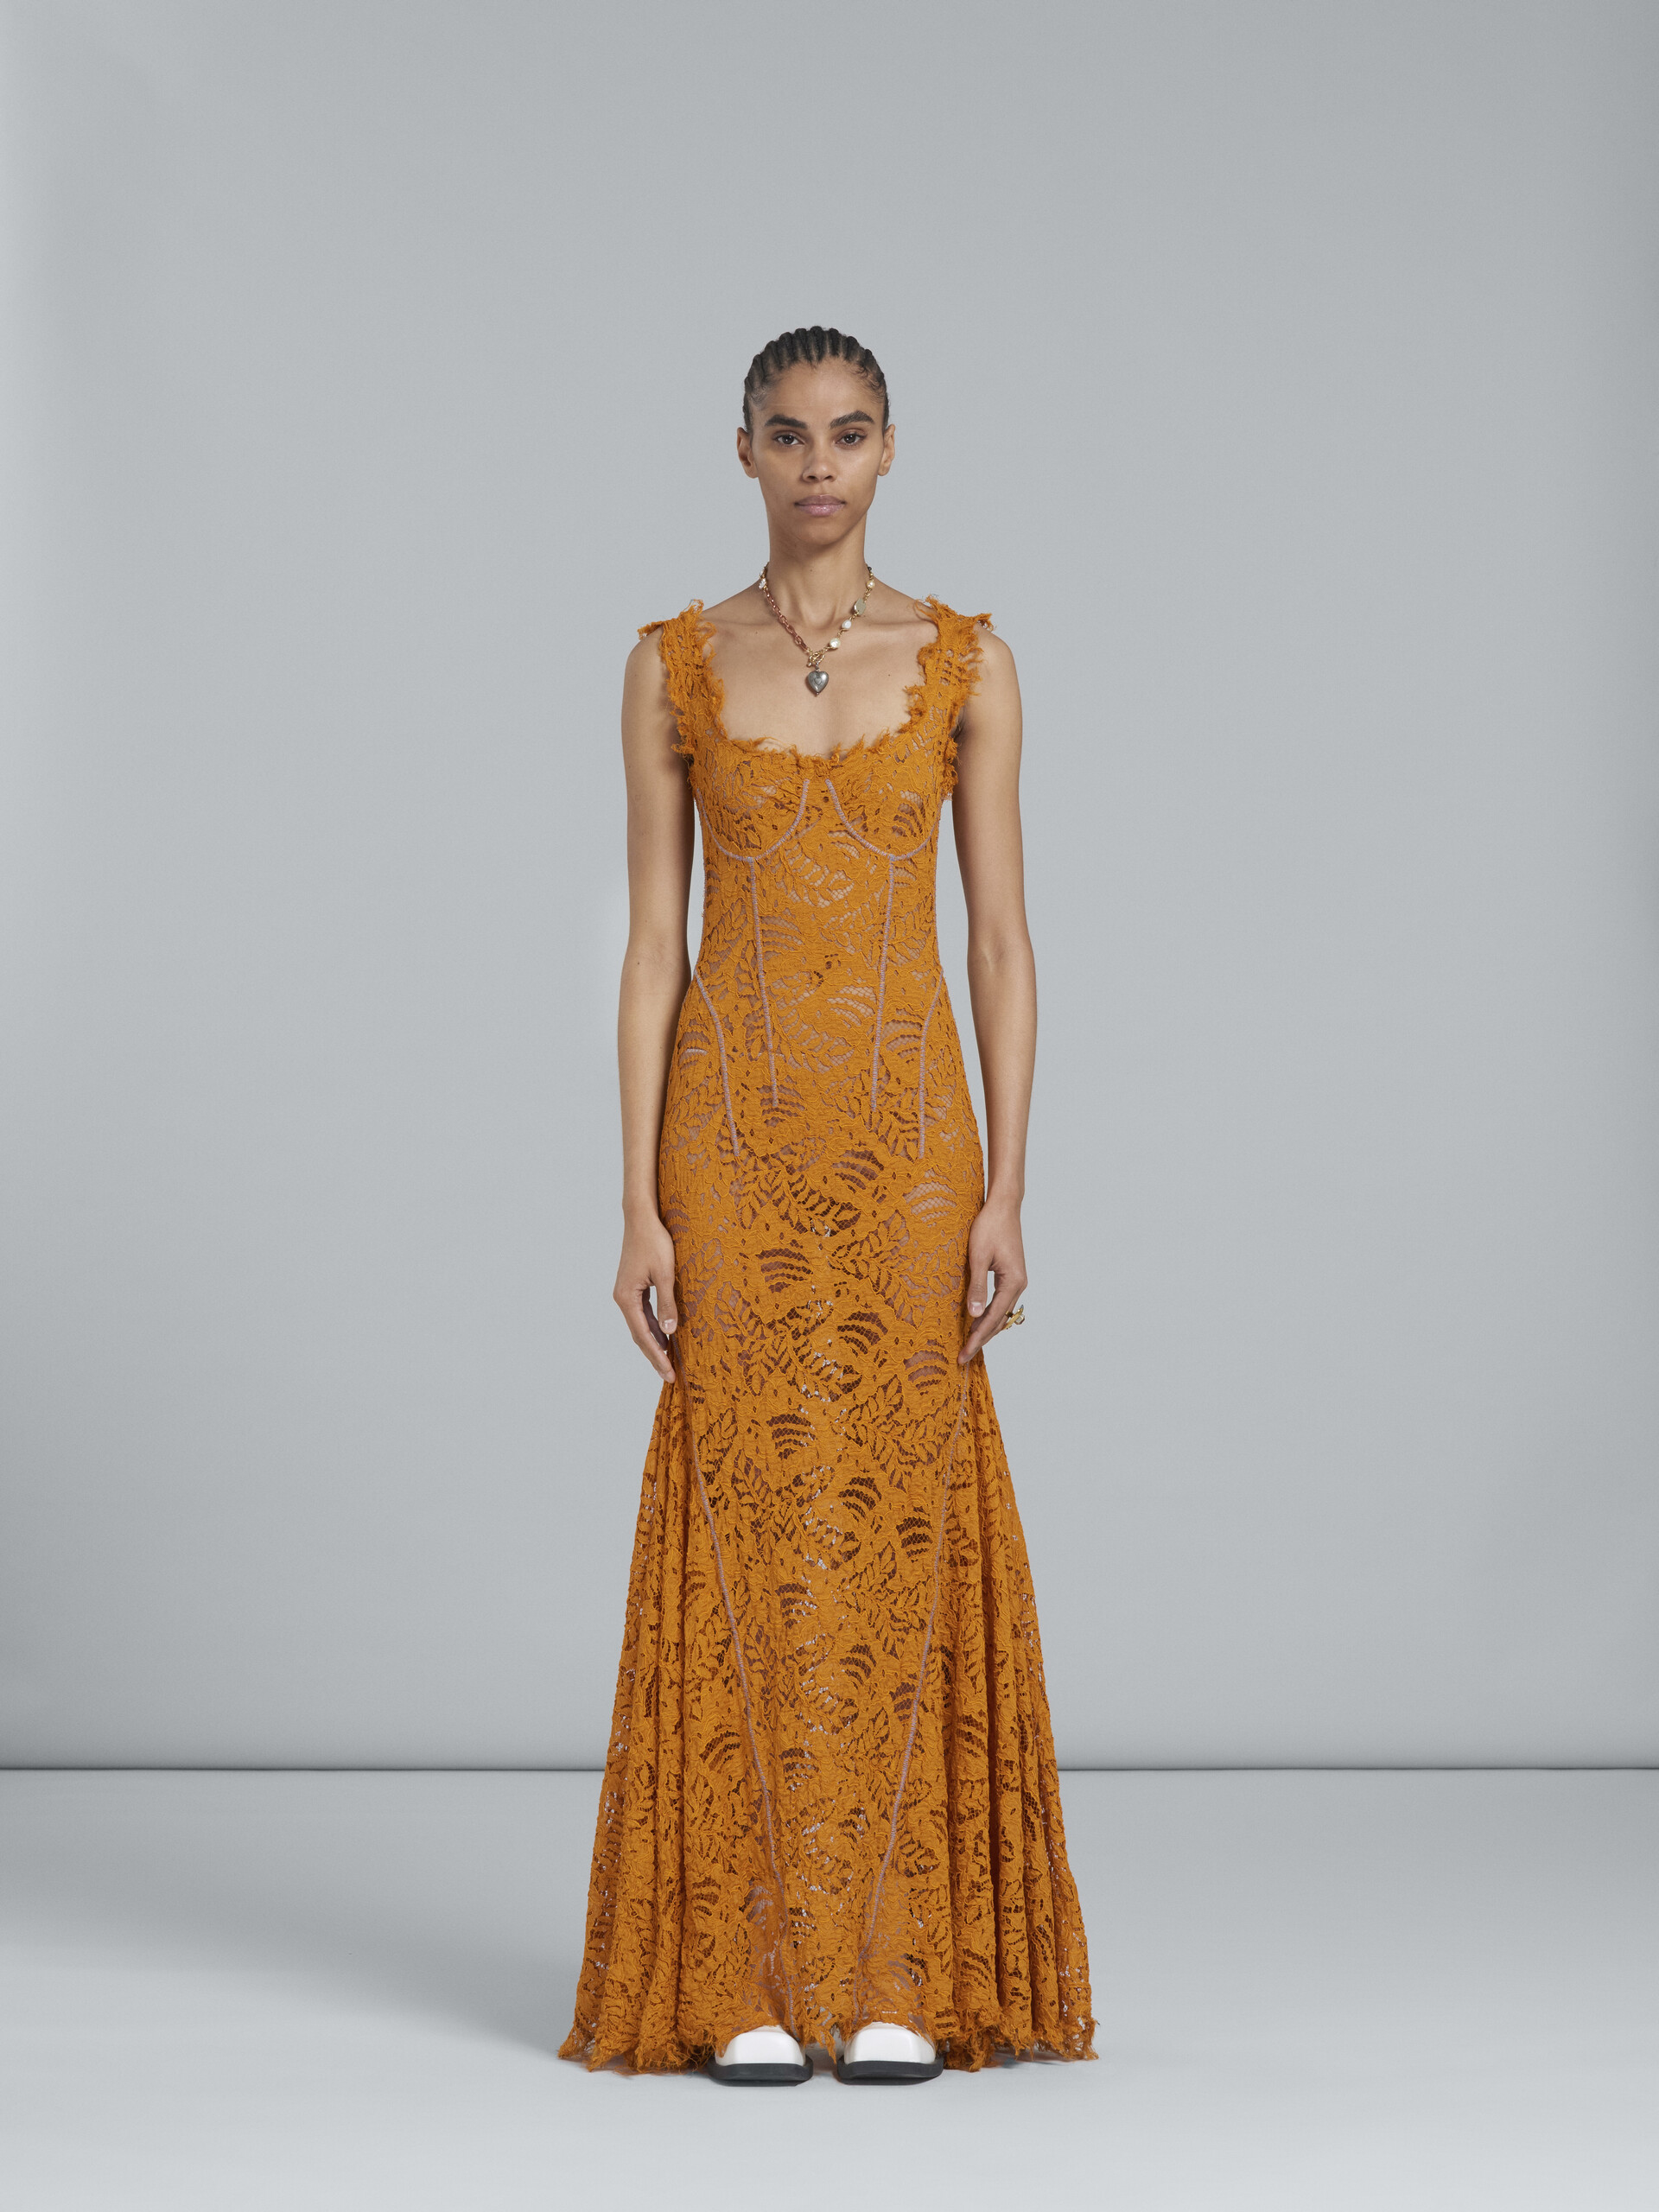 Long dress in gold-tone lace - Dresses - Image 2